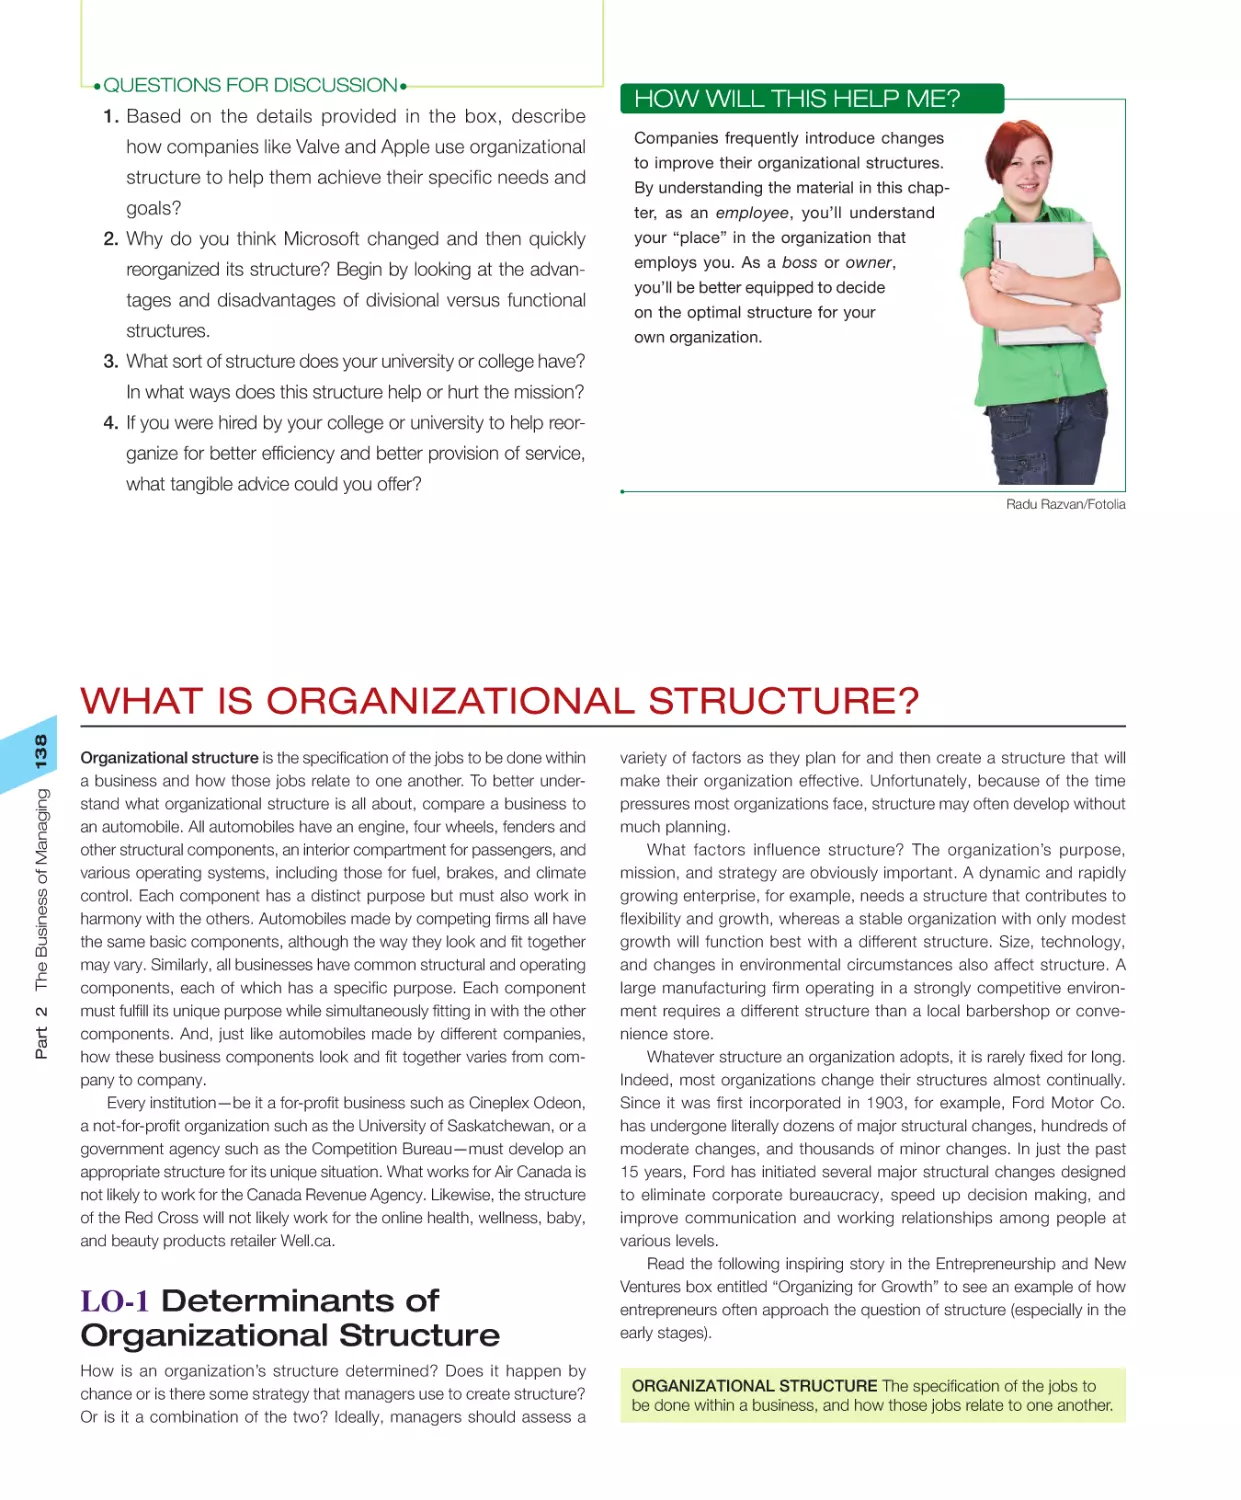 What Is Organizational Structure?
LO‐1 Determinants of Organizational Structure